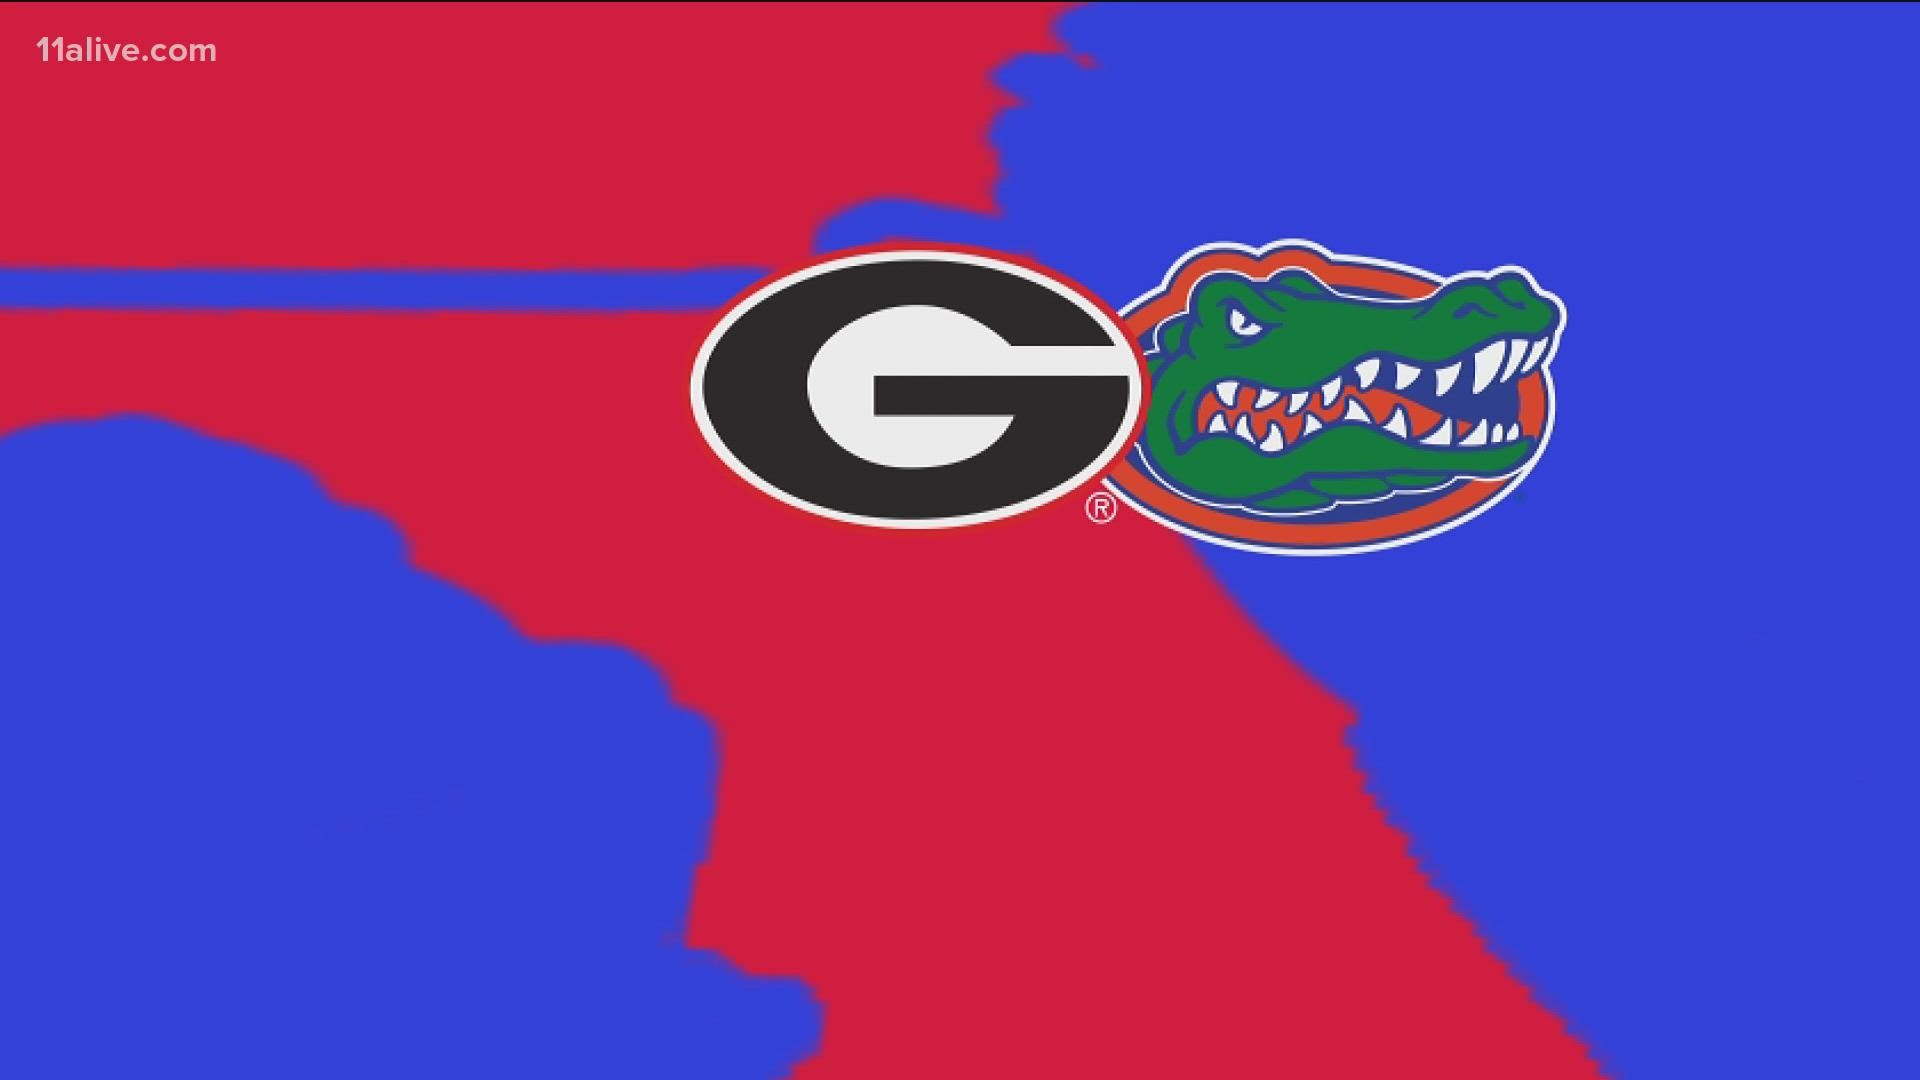 11Alive's Why Guy answers why the Florida, Georgia game is always played in Jacksonville and not on either team's home turf.